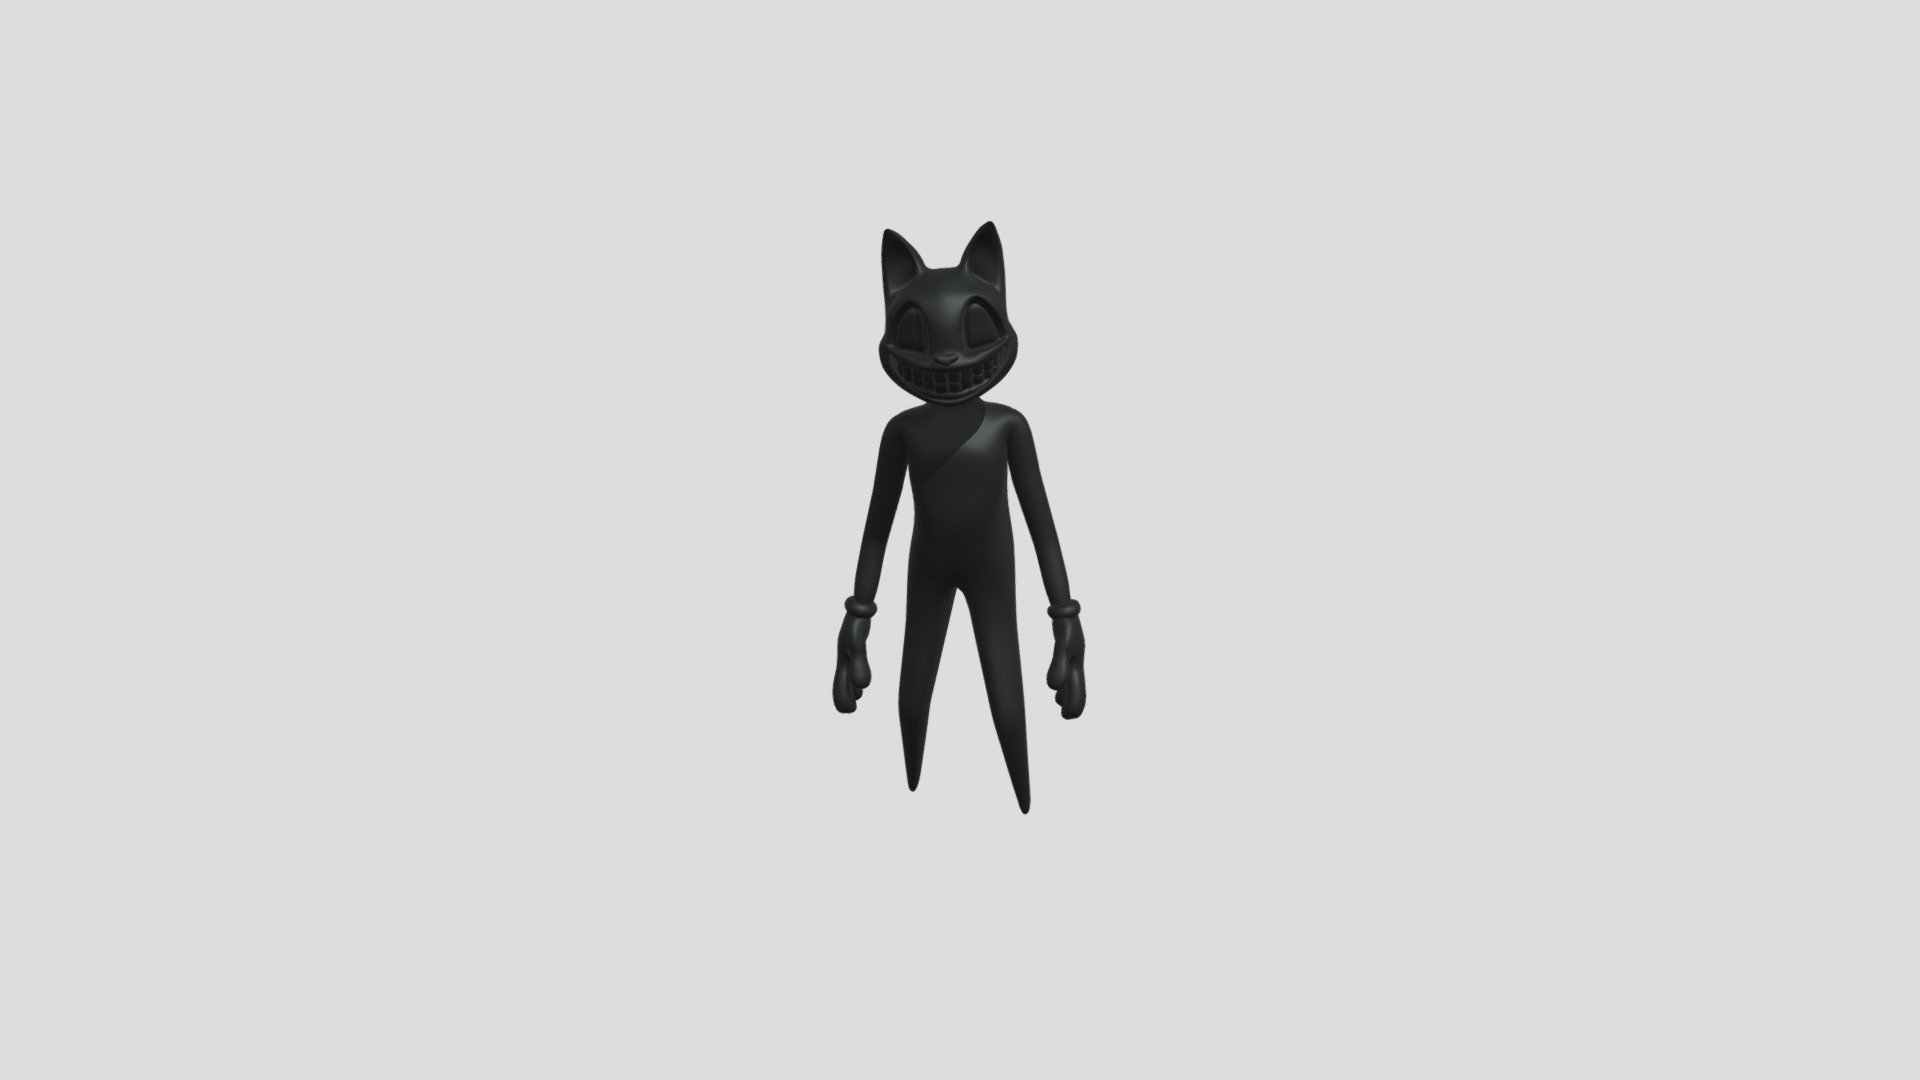 A Rigged Cartoon Cat Model with Animation - Cartoon Cat - Download Free 3D model by SirenGame26 (@Sirengame.26) 3d model